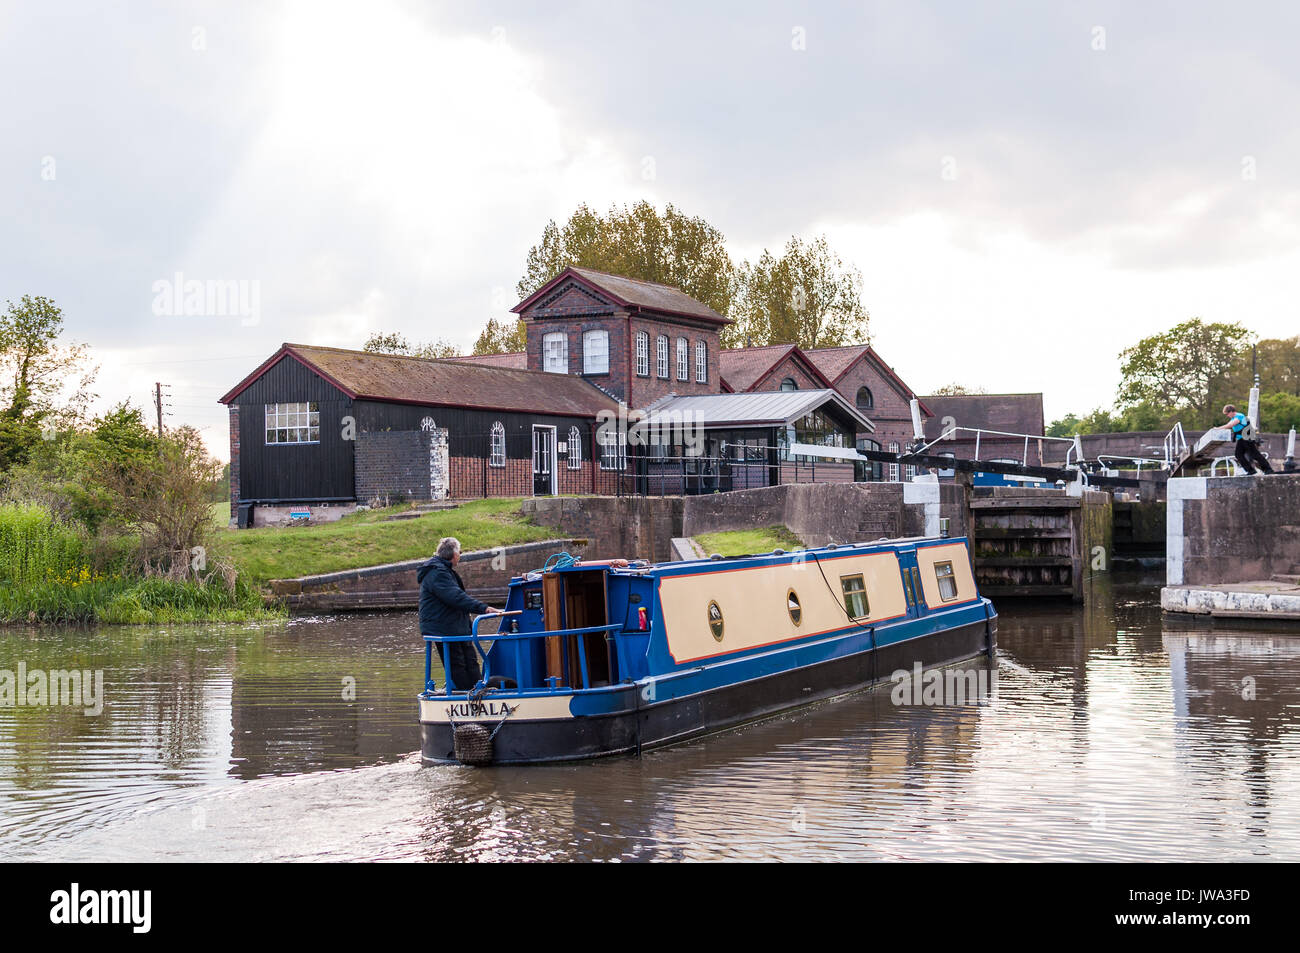 A narrowboat traversing Hatton Locks on the Grand Union Canal with visitor centre in background, Warwickshire, United Kingdom Stock Photo